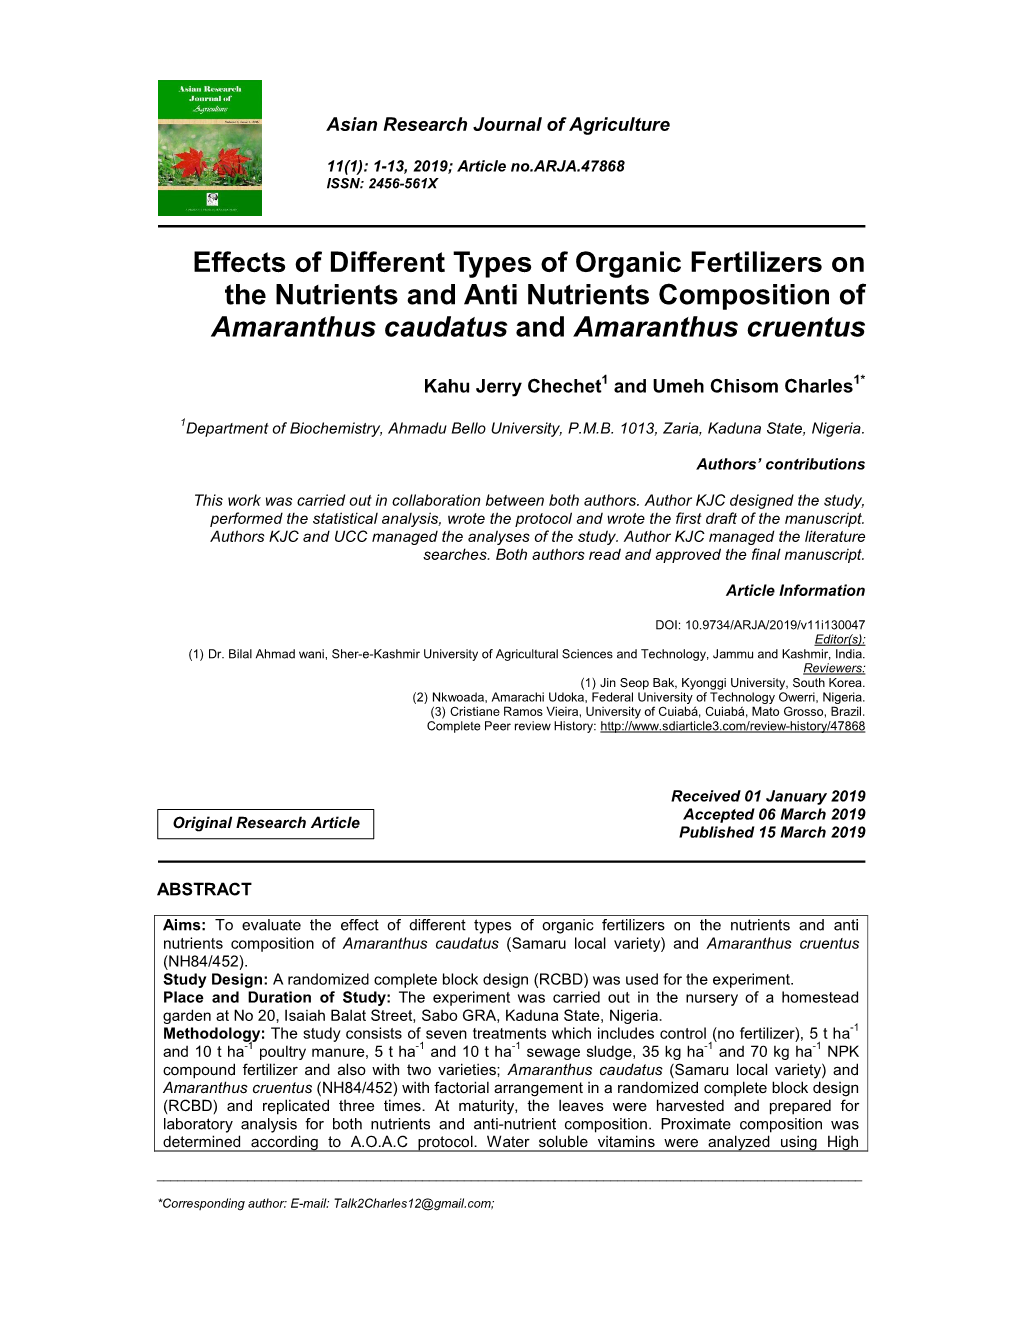 Effects of Different Types of Organic Fertilizers on the Nutrients and Anti Nutrients Composition of Amaranthus Caudatus and Amaranthus Cruentus